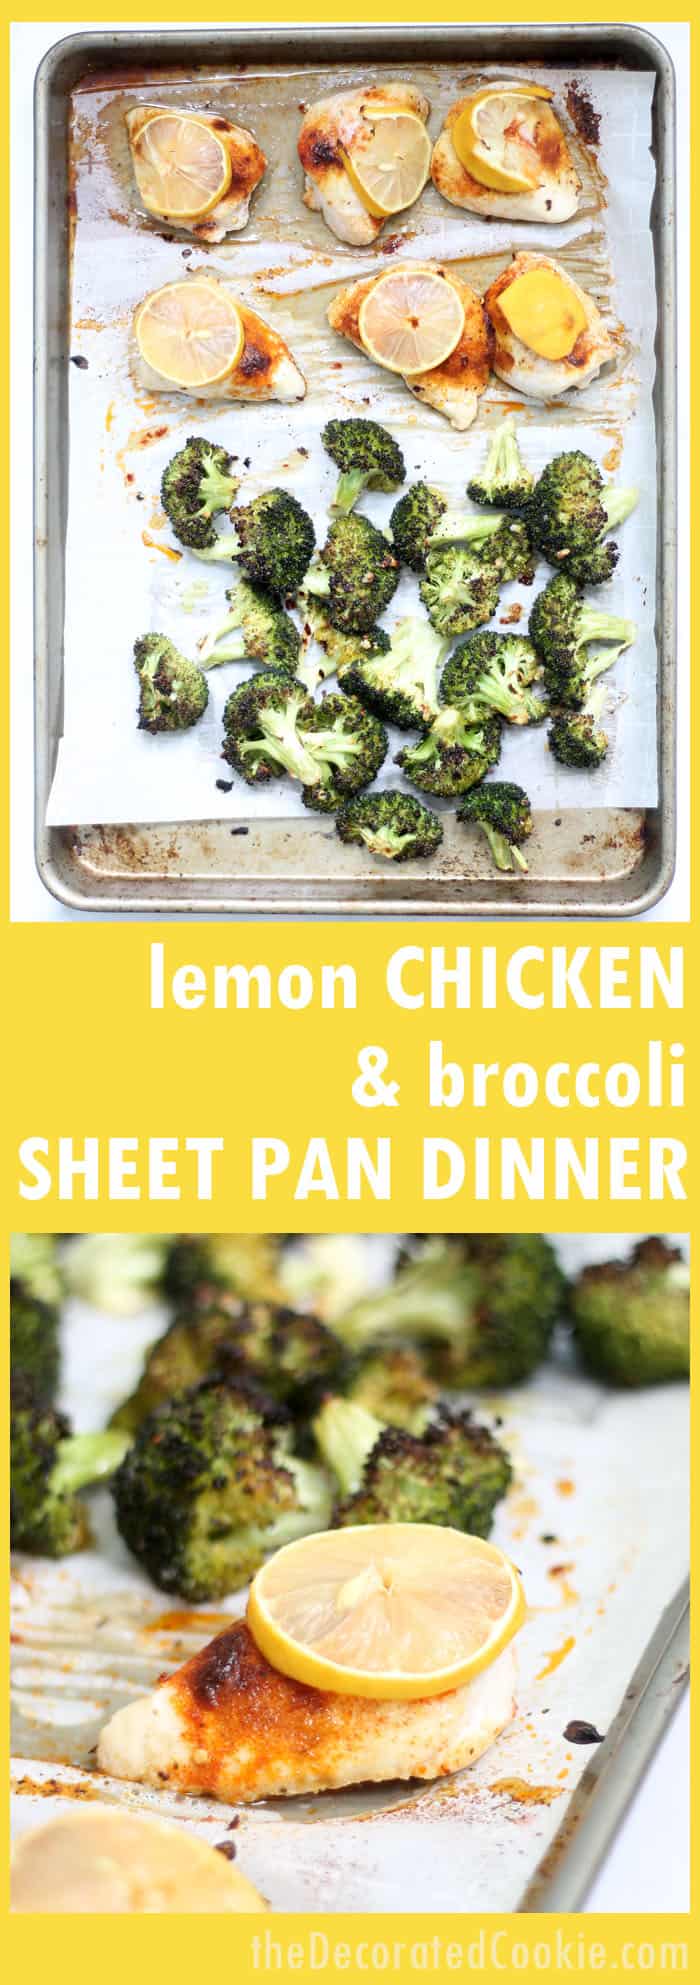 This easy lemon chicken and broccoli sheet pan dinner is delicious, full of flavor, and ready in under 30 minutes. It's low-carb, keto, whole 30, gluten-free, and an all around winner. 